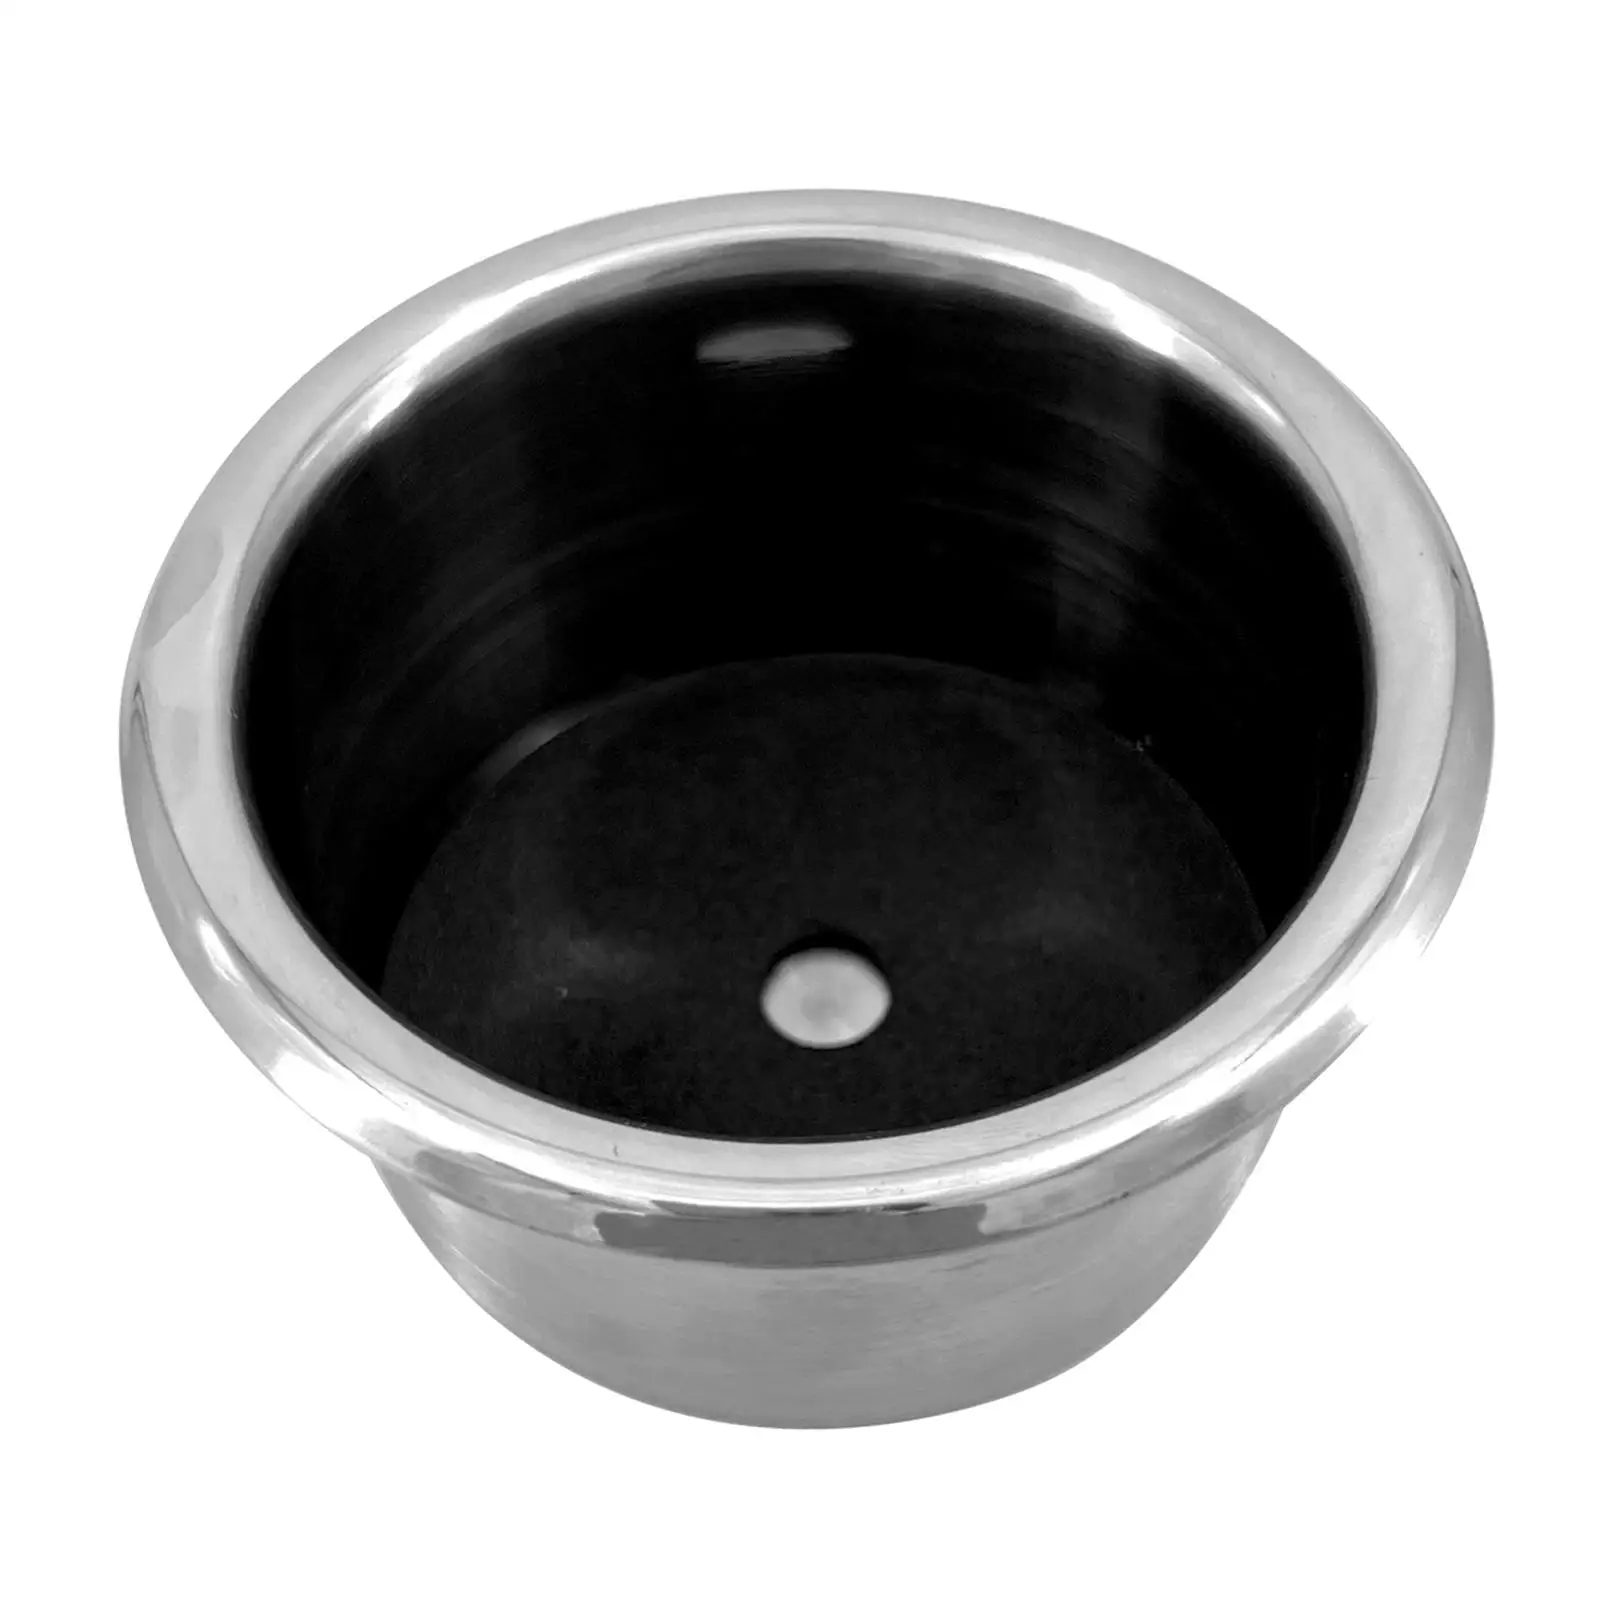 Cup Drink Holder Insert with Drain Sturdy Portable Accessories Smooth Surface Universal for Truck Marine Boat Camper Car